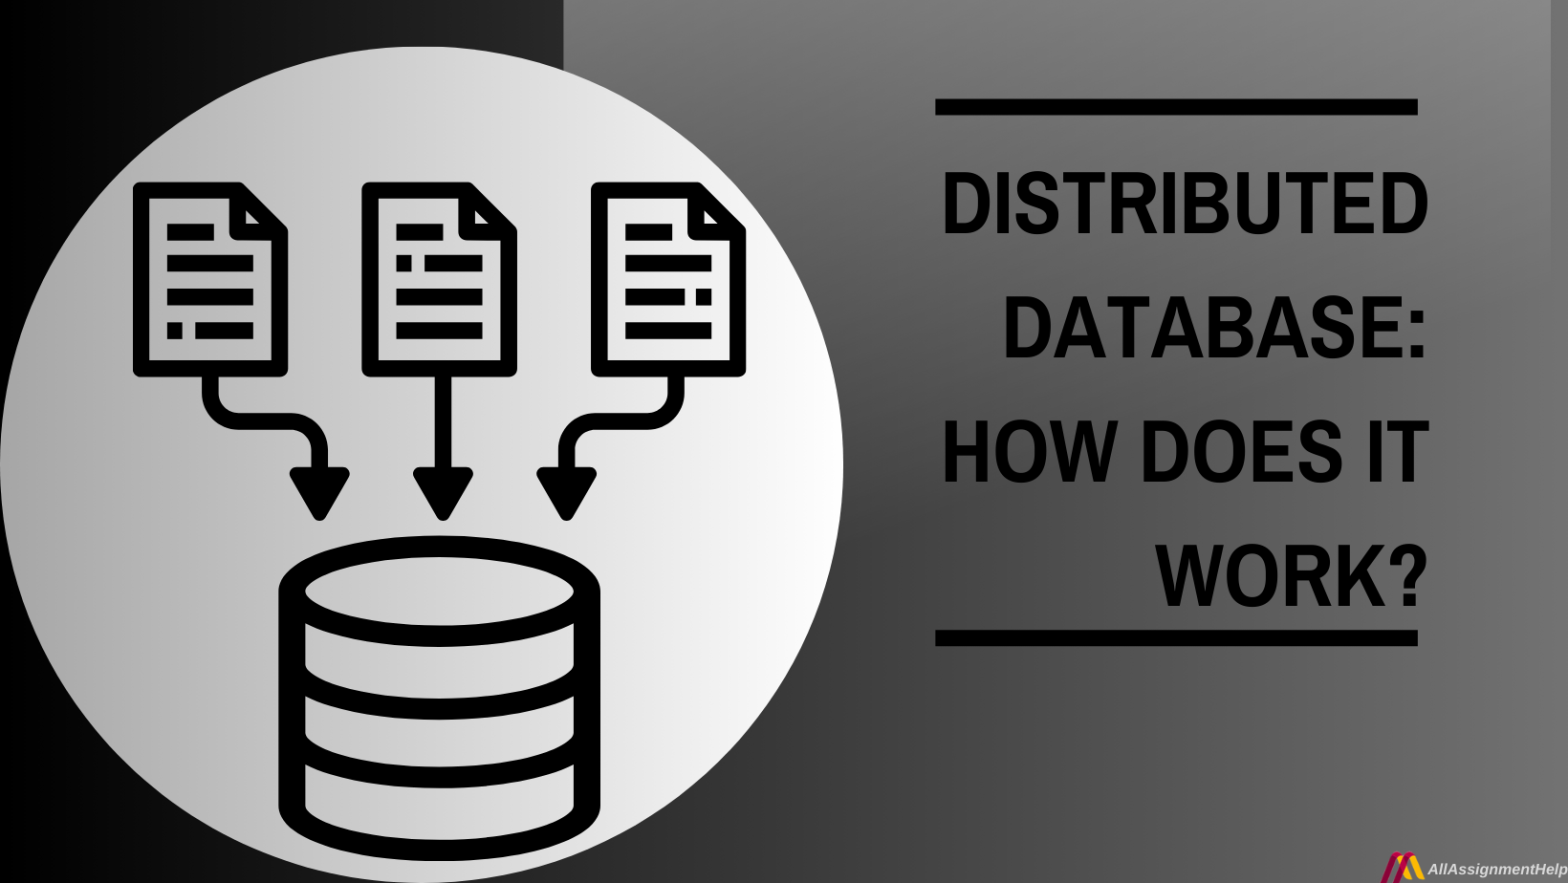 Distributed Database: How Does It Work?